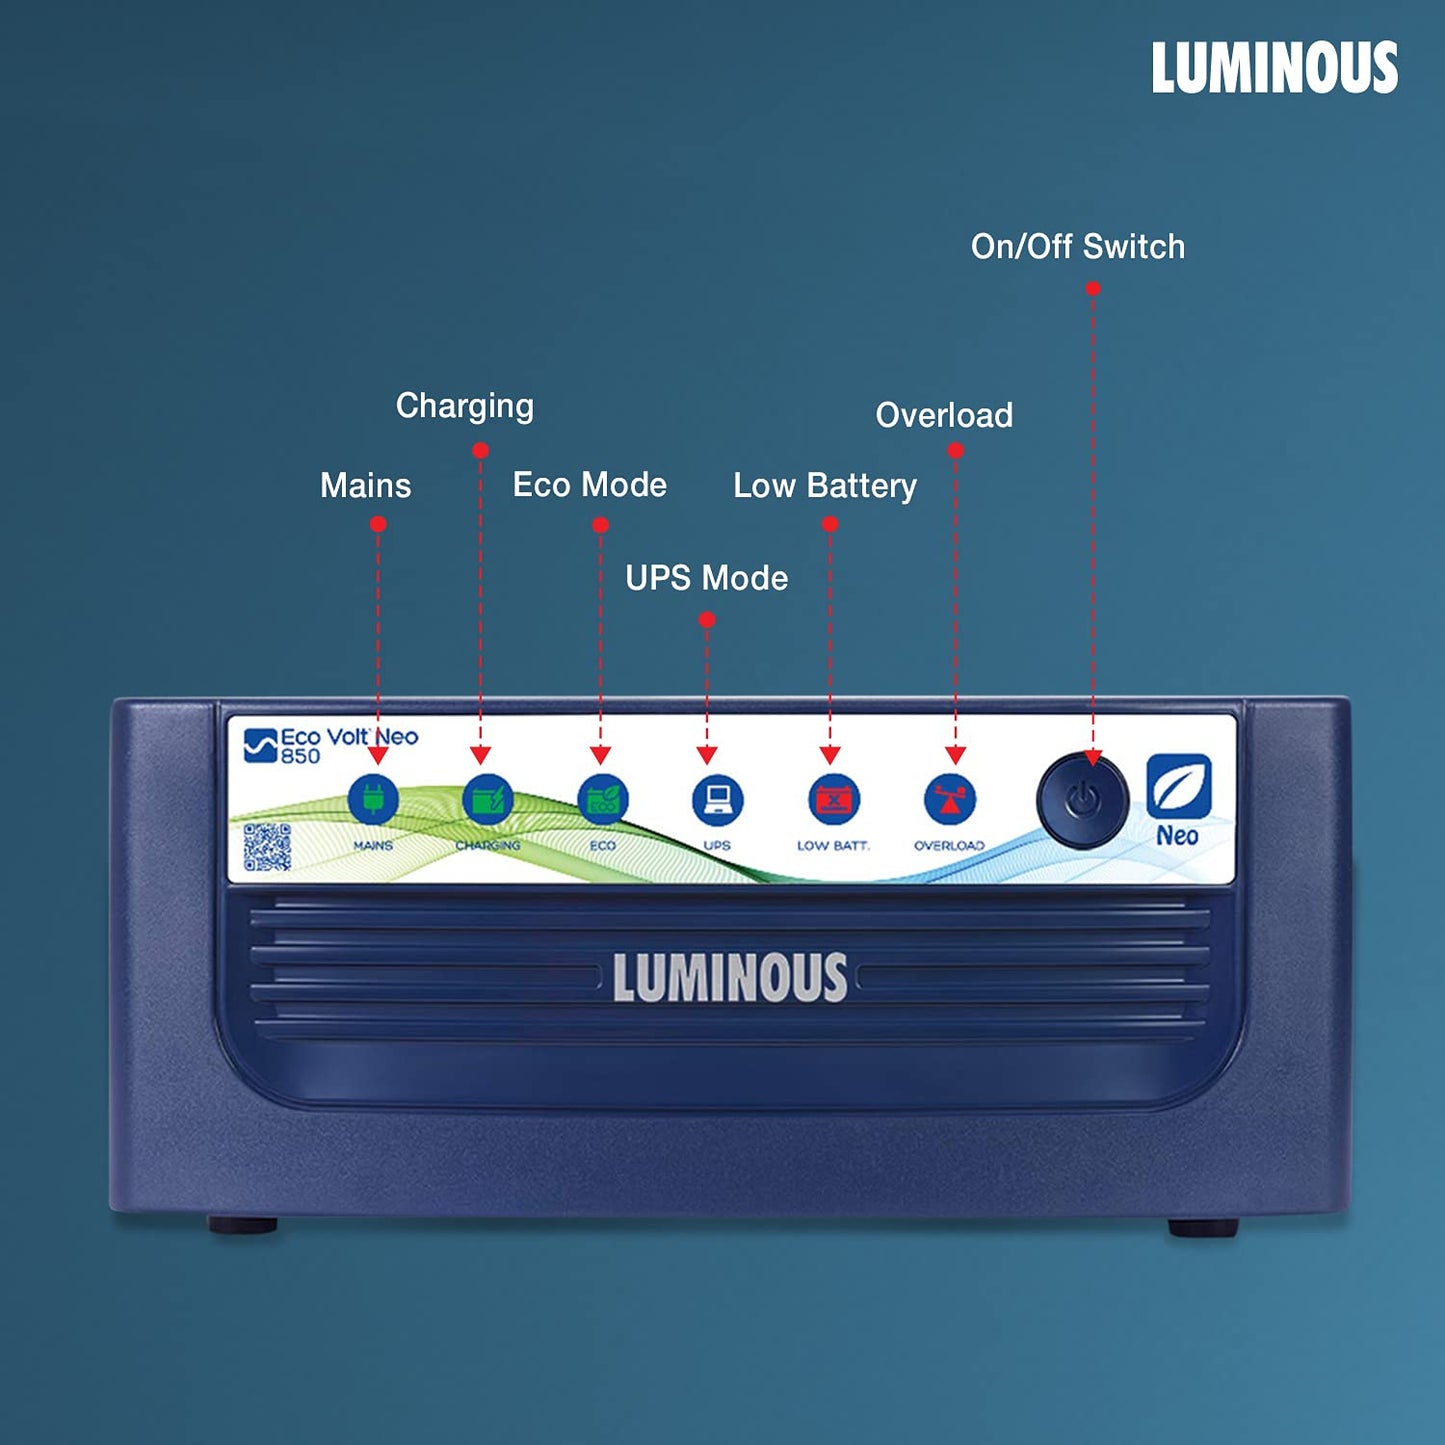 Luminous Eco Volt Neo 850 Pure Sine Wave Inverter RC15000 120 Ah Tubular Battery and Trolley for 1BHK